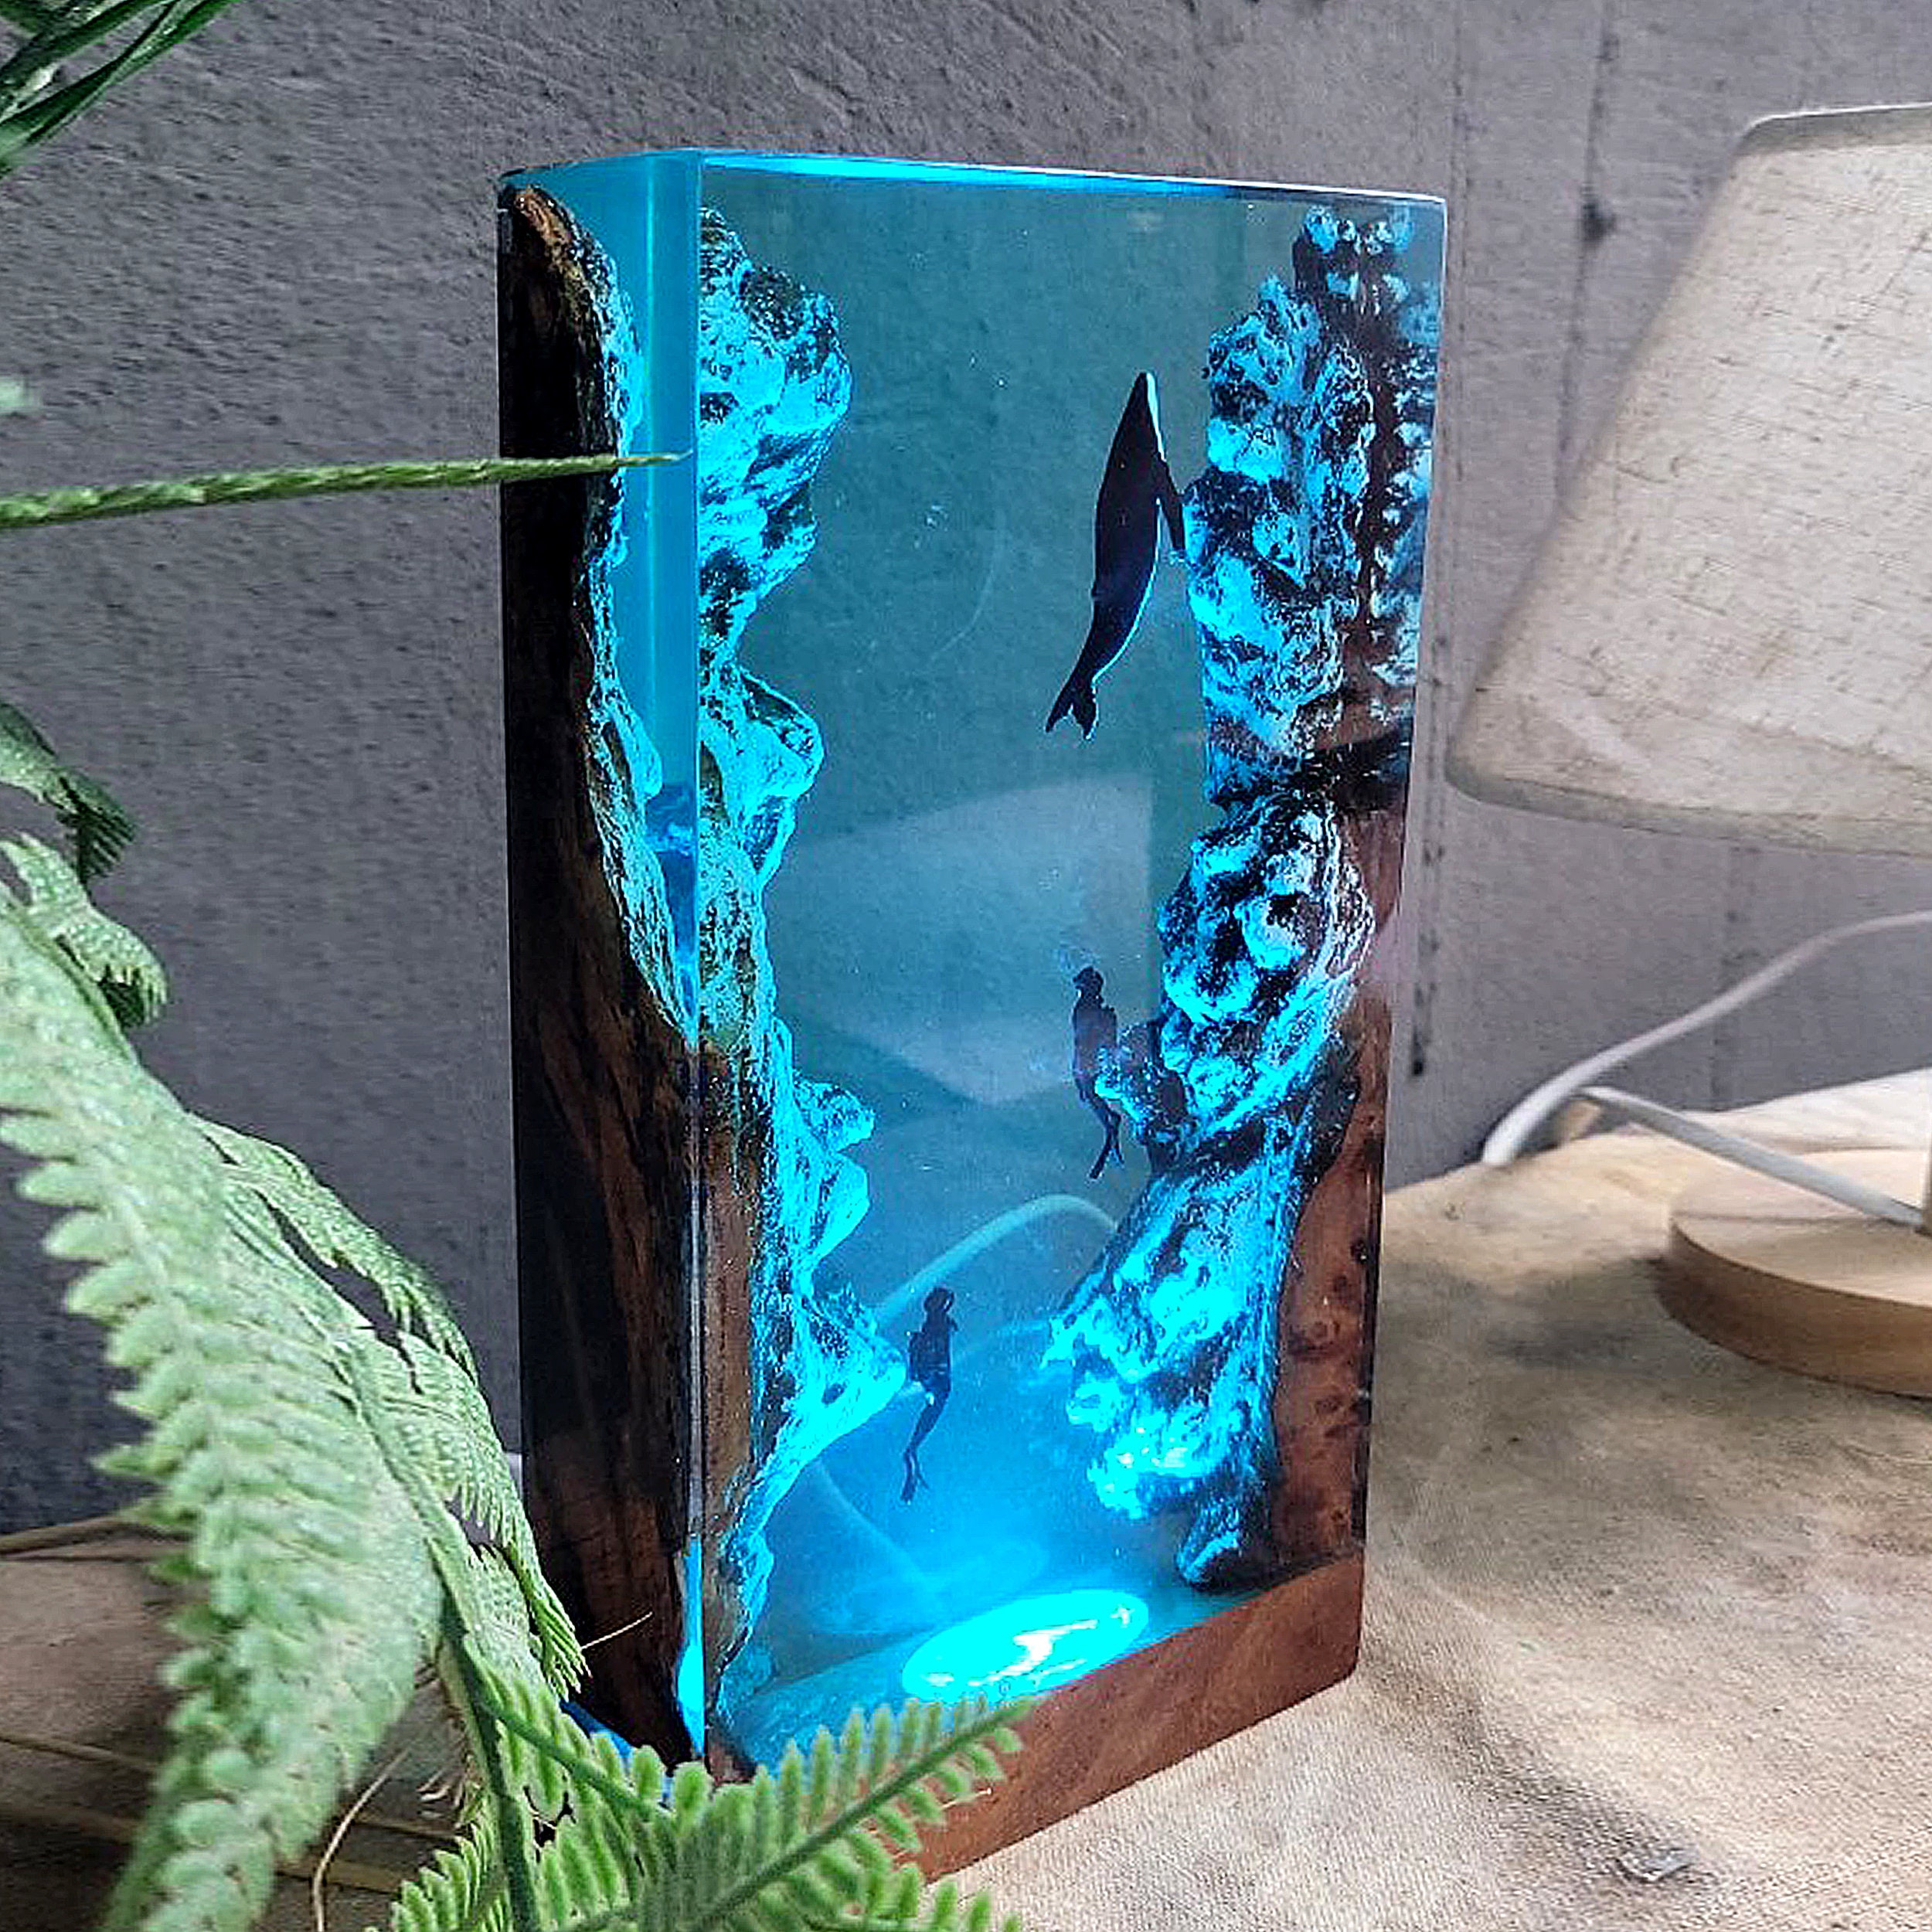  Handmade Deep Sea Cave Diving Night Lights, Epoxy Resin Wood  Light Lamp, home decor unique gift : Handmade Products